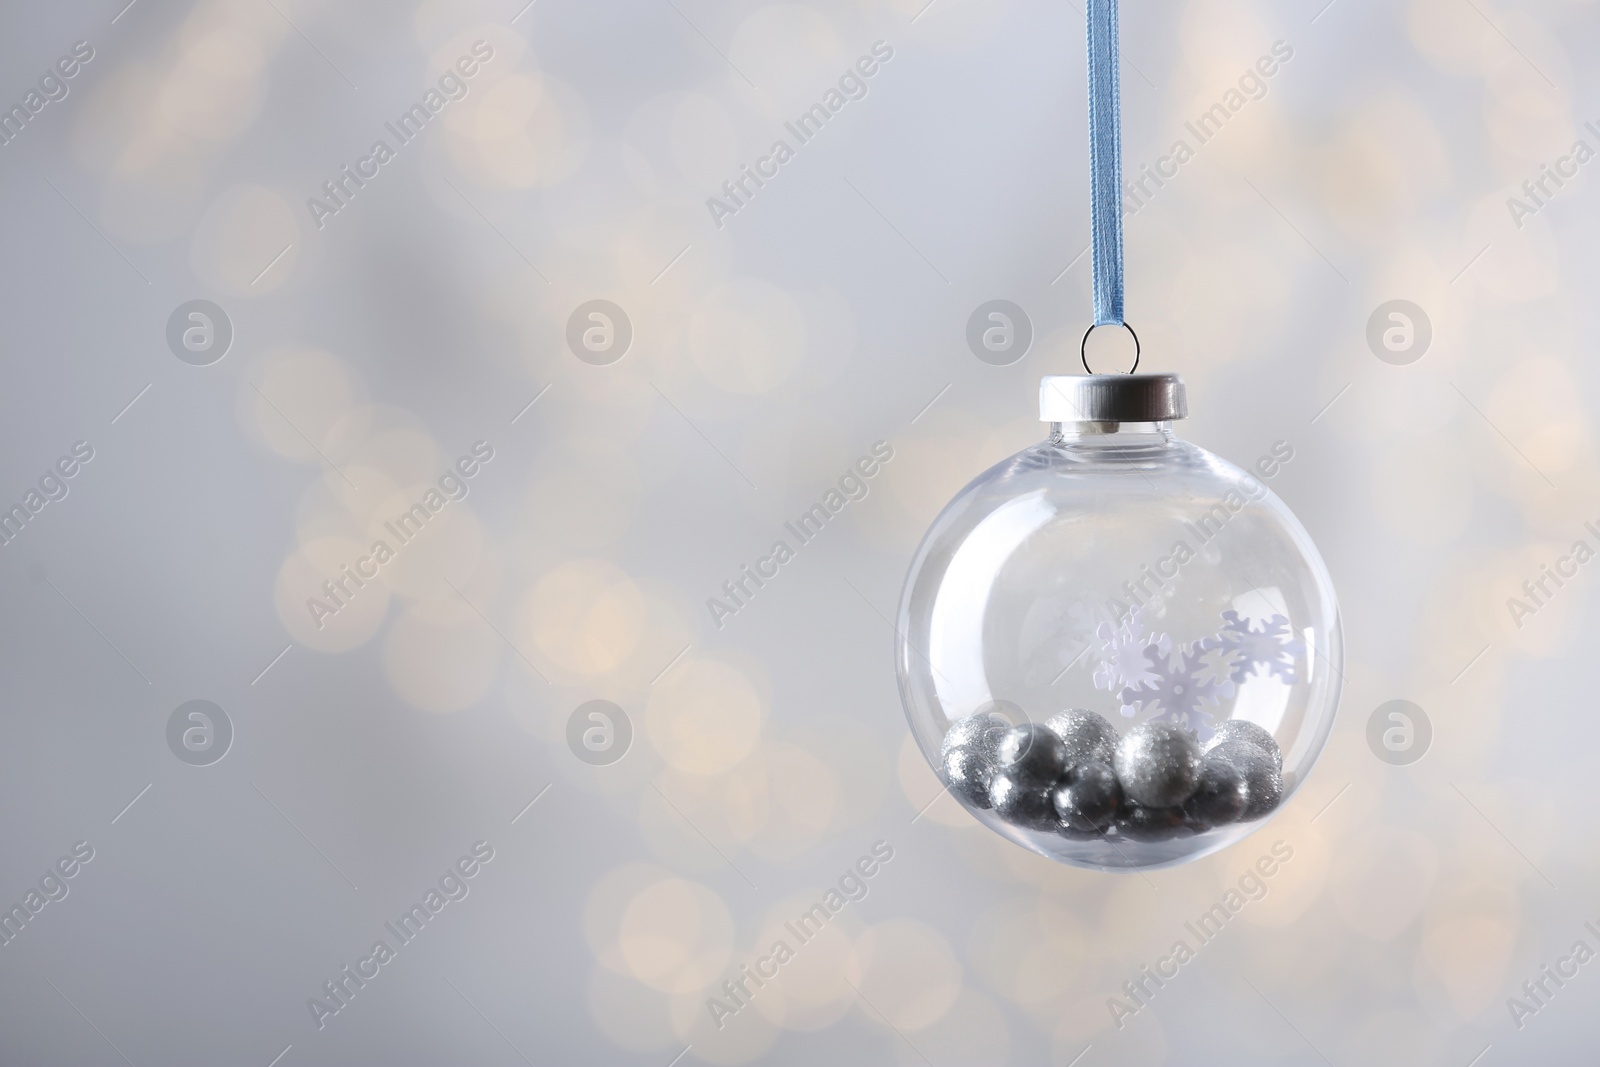 Photo of Decorative snow globe against blurred festive lights, space for text